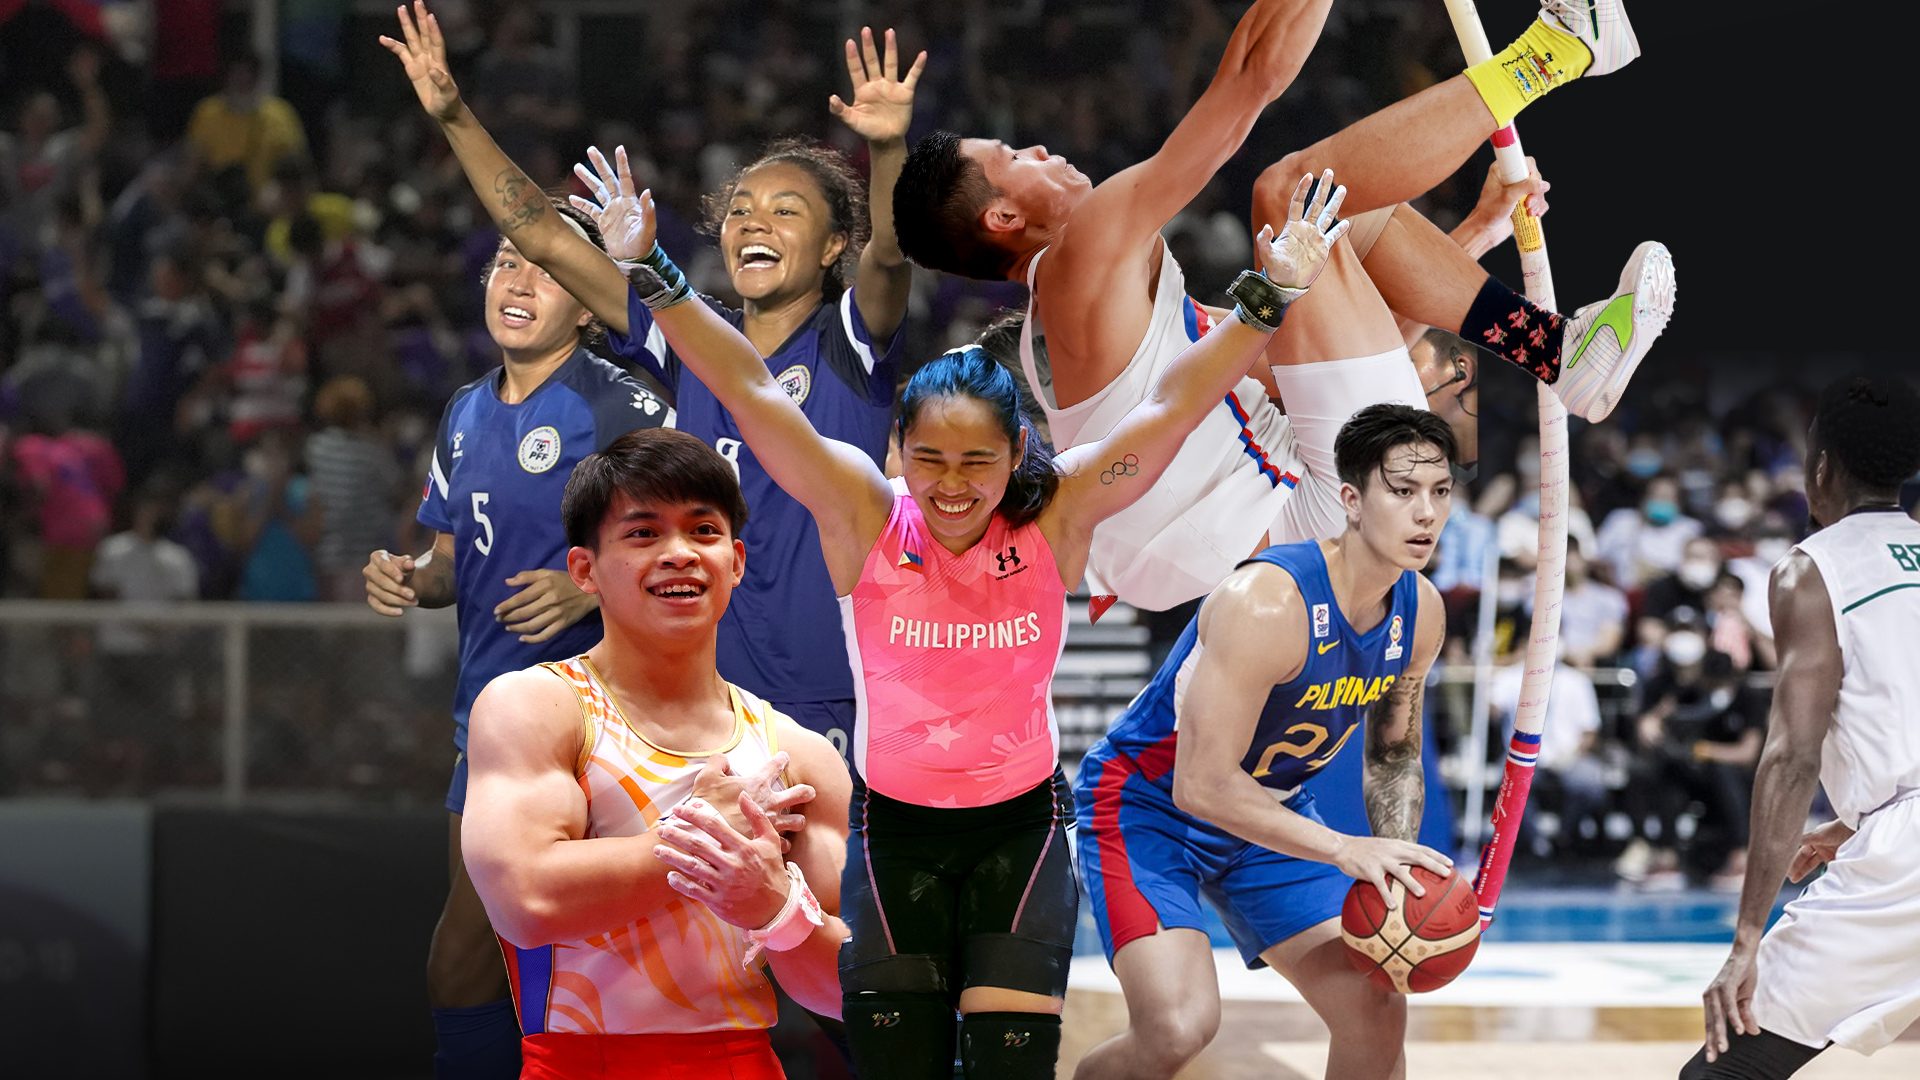 Looking at a banner year for Philippine sports